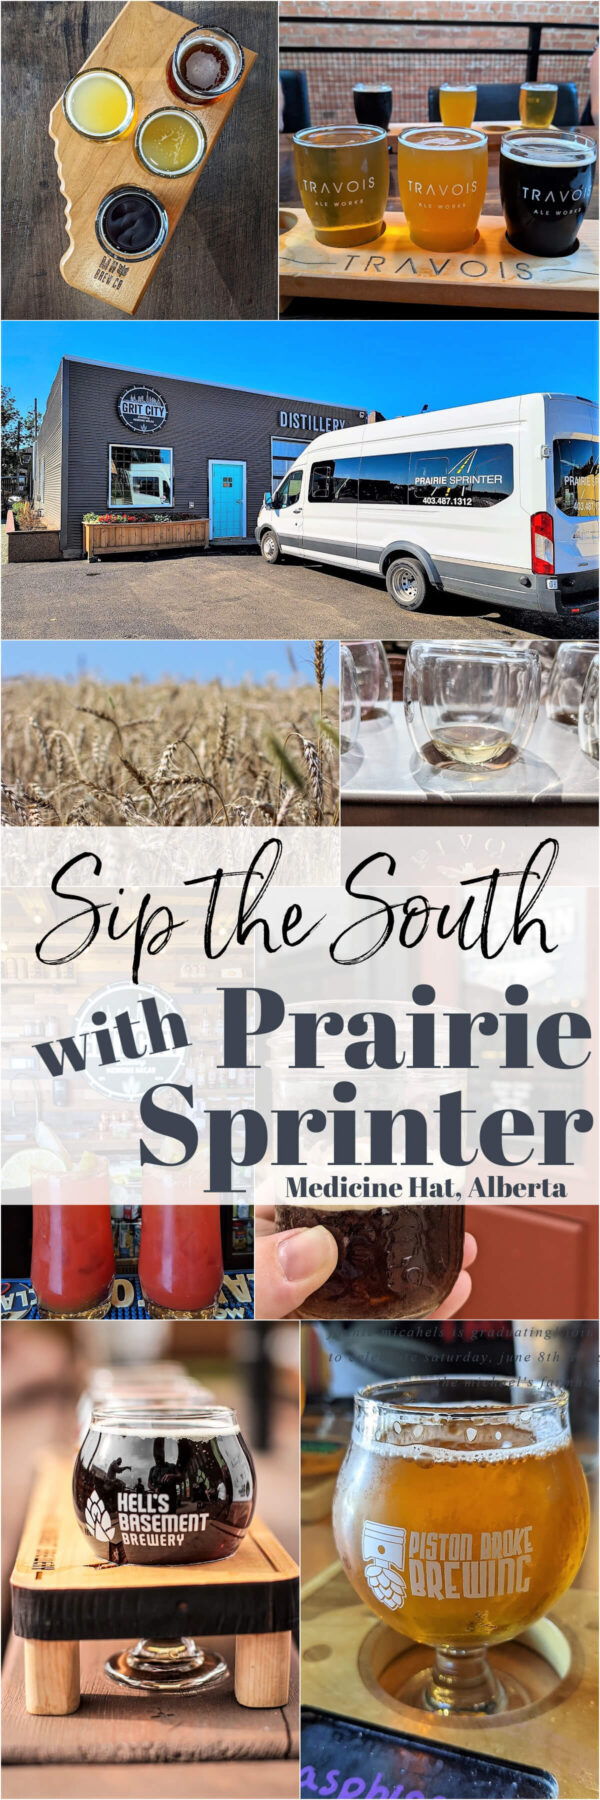 Pinterest image featuring beer and spirits from stops along the Prairie Sprinter Sip the South tour.